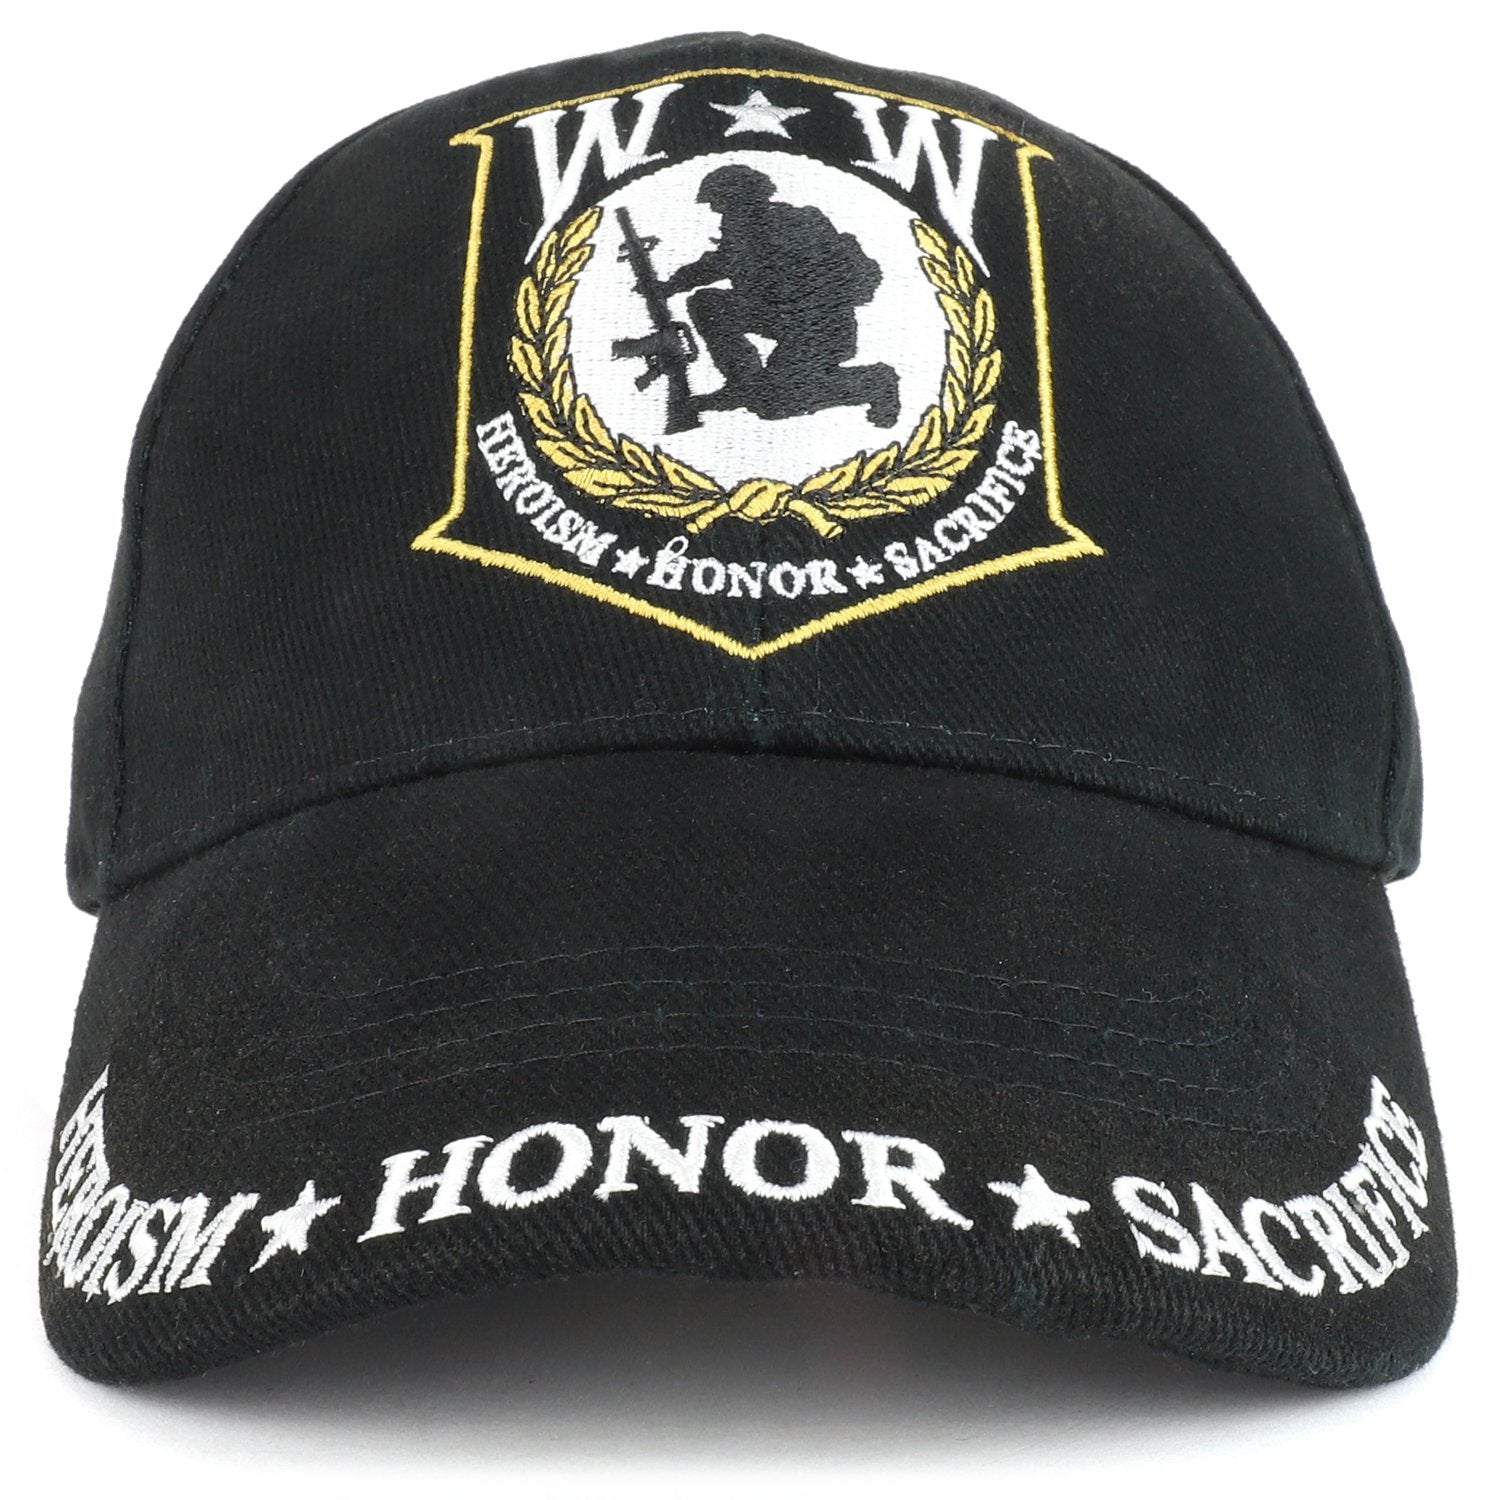 Armycrew Wounded Warrior Heroism Honor Sacrifice Embroidered Structured Baseball Cap